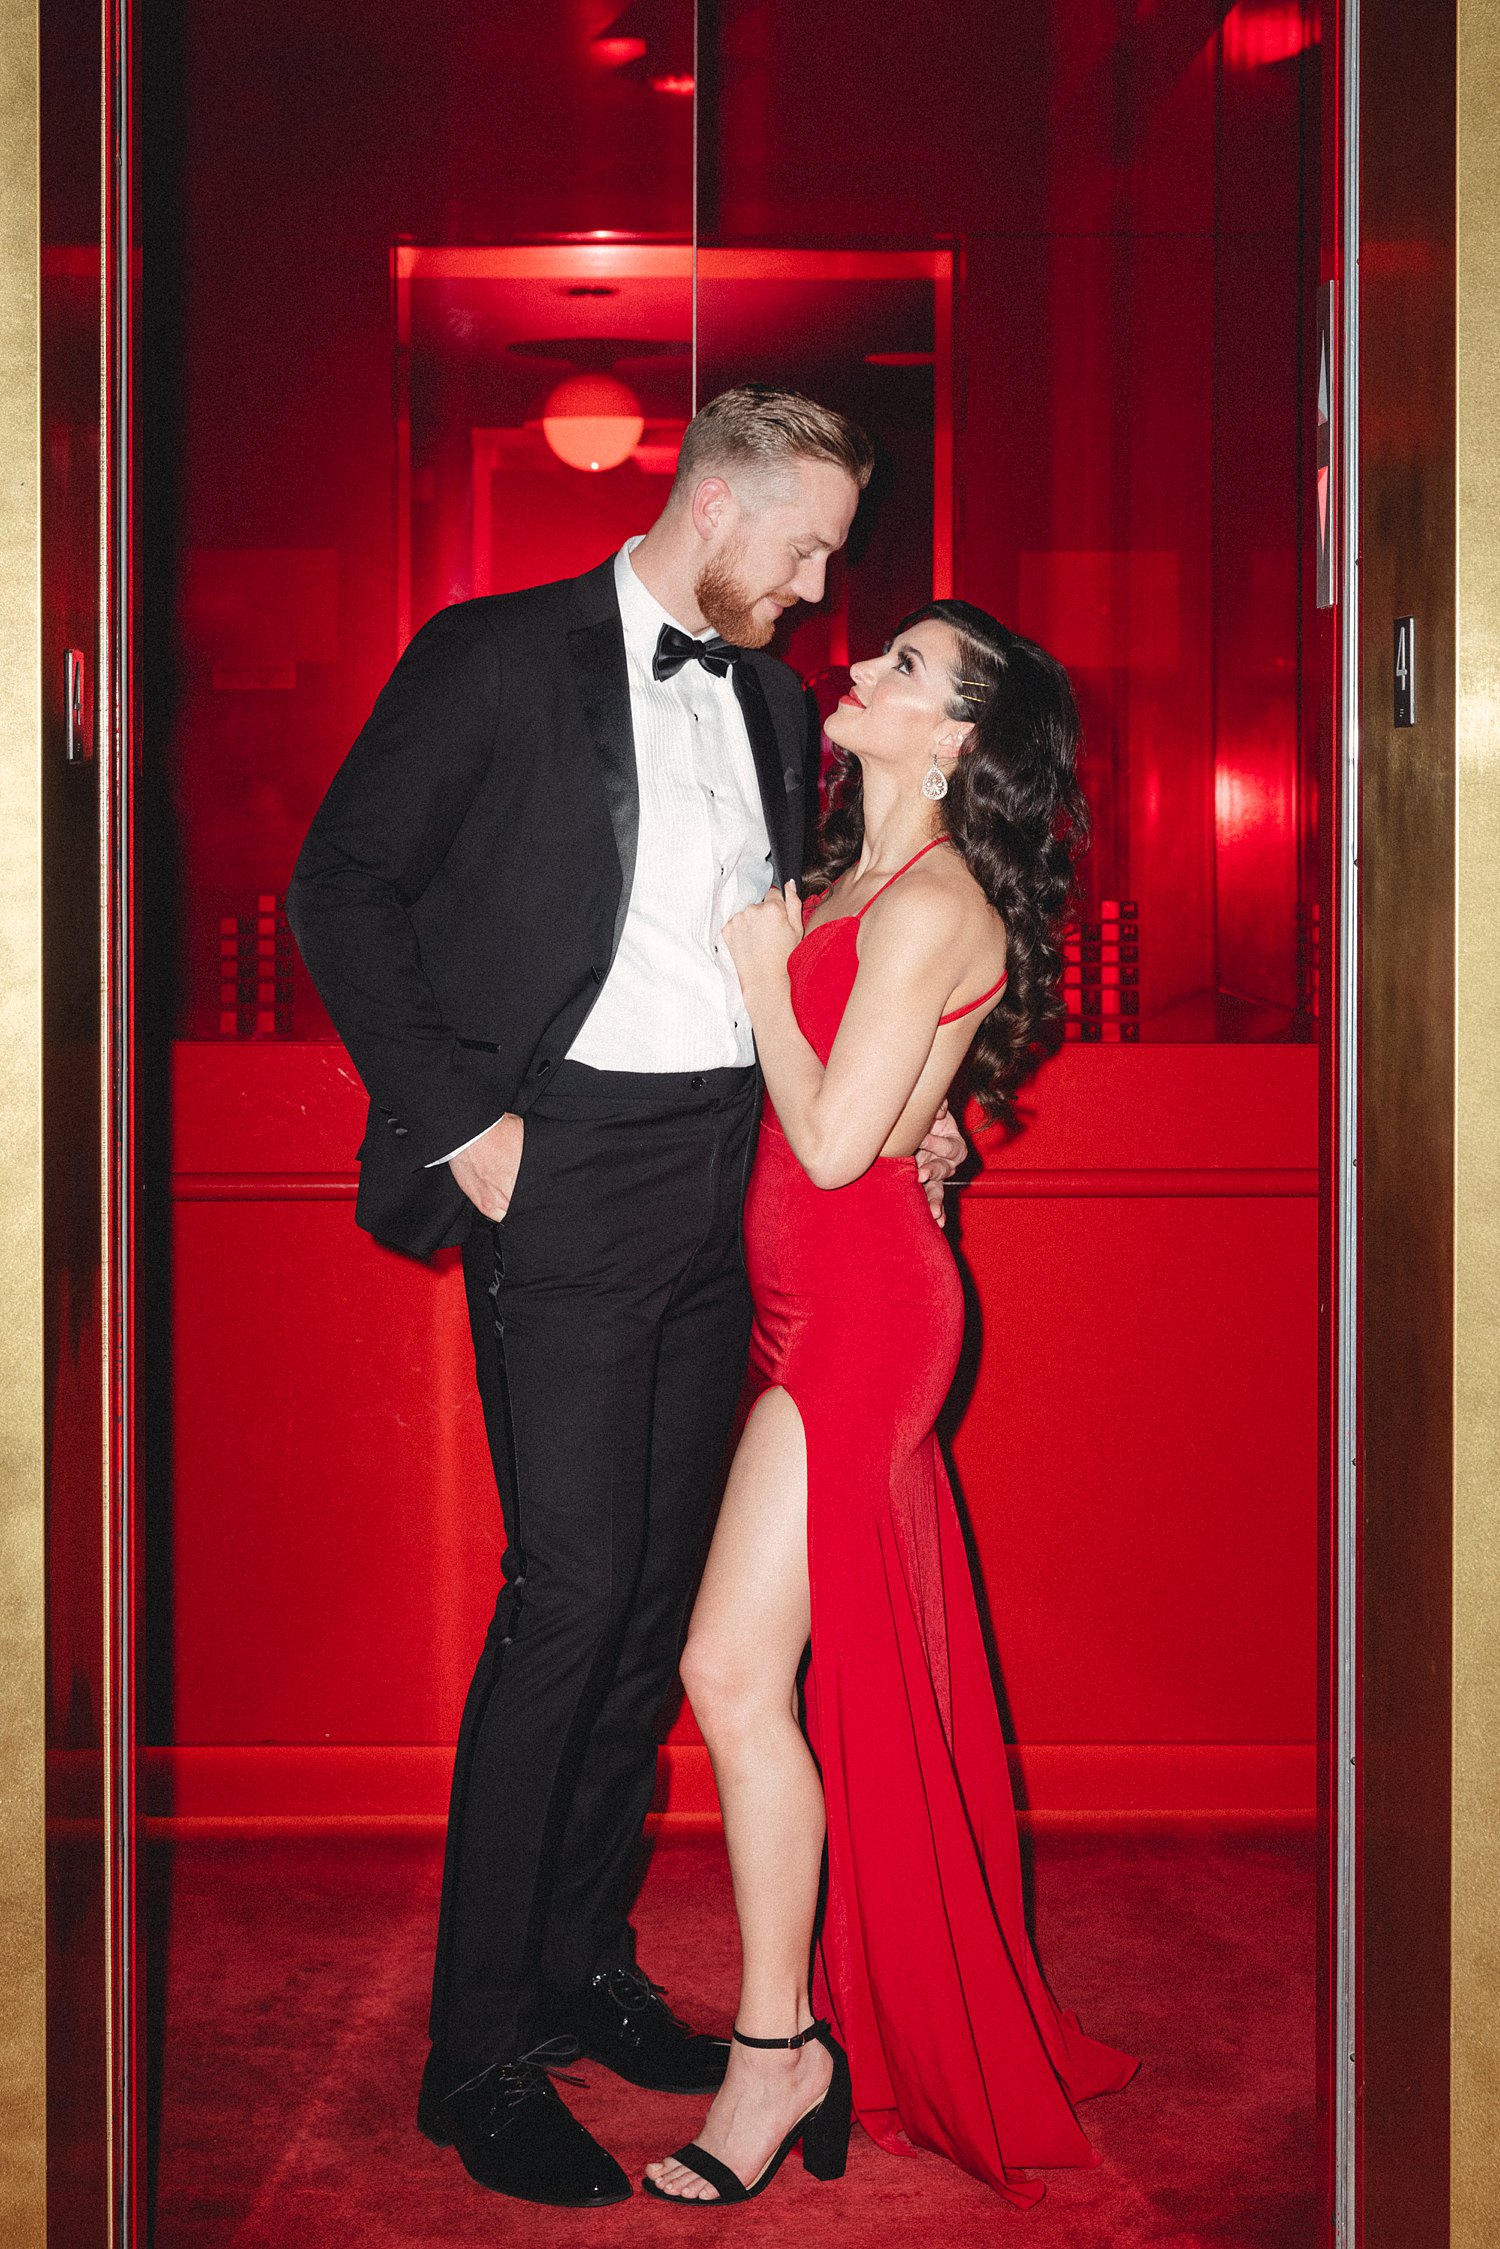 Woman in Red Dress and man in black tuxedo standing together in Virgin Hotel elevator Dallas Engagement